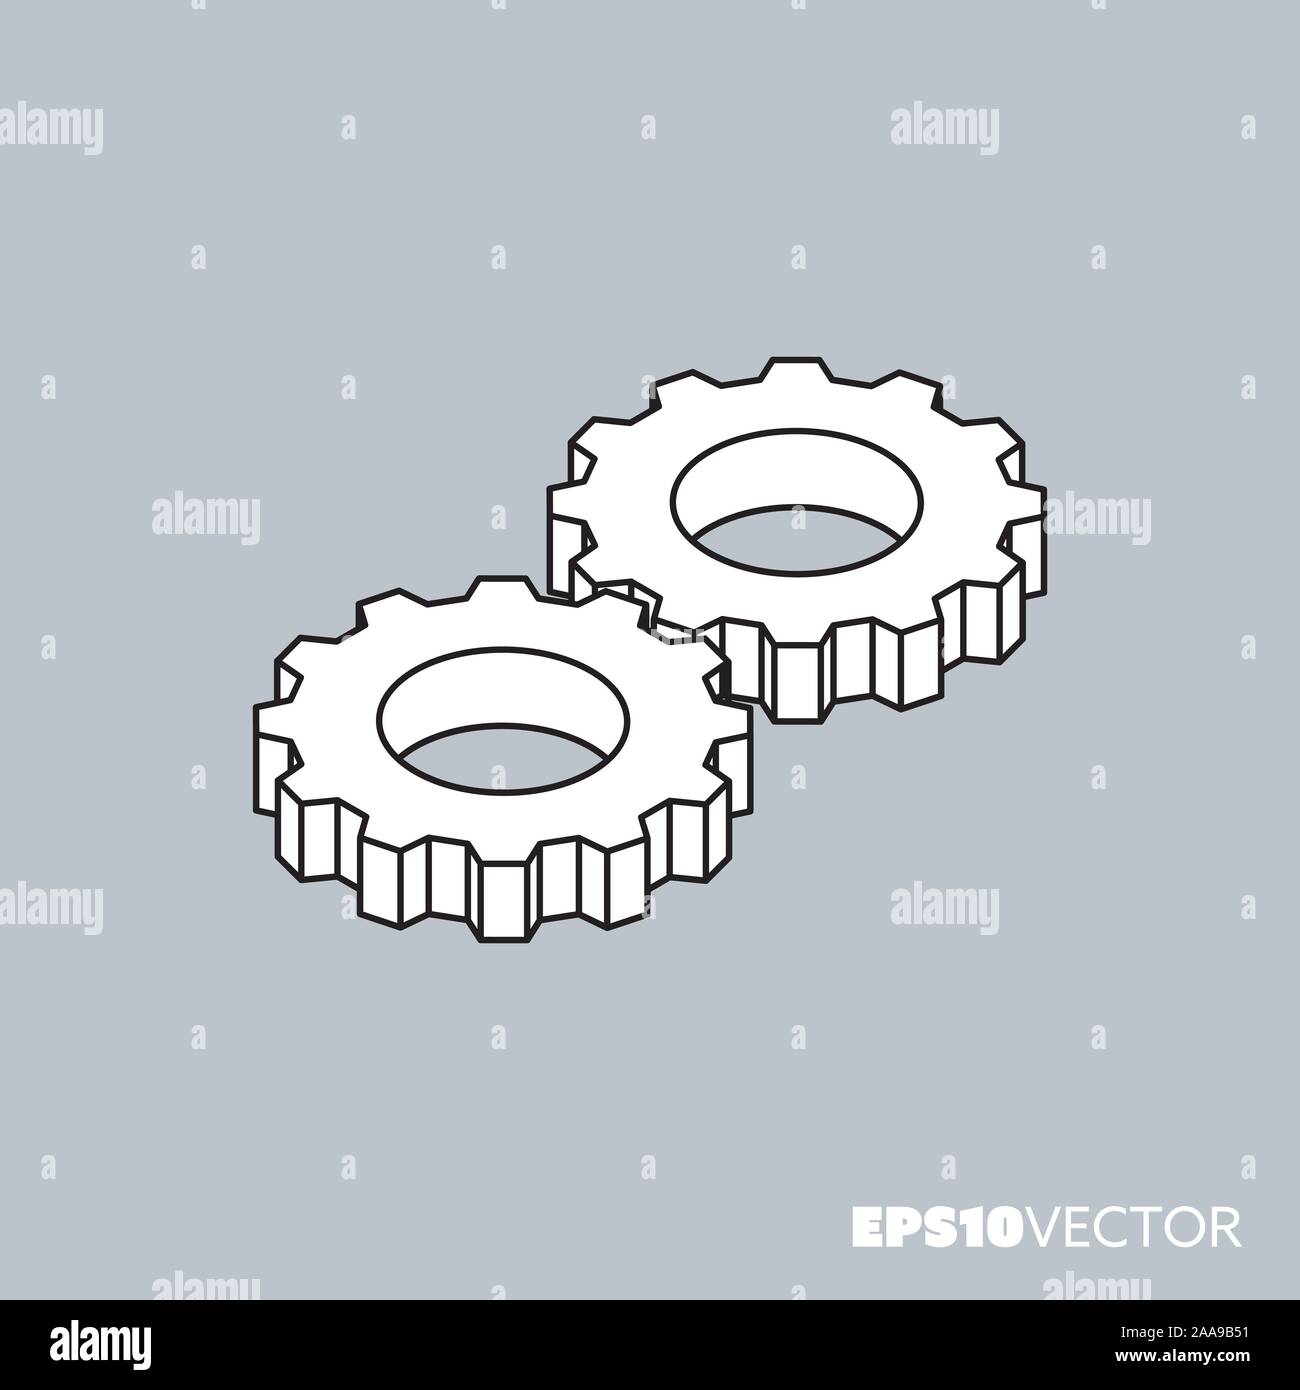 Cogwheels icon, outline symbol. Teamwork, settings or industry concept vector illustration. Stock Vector